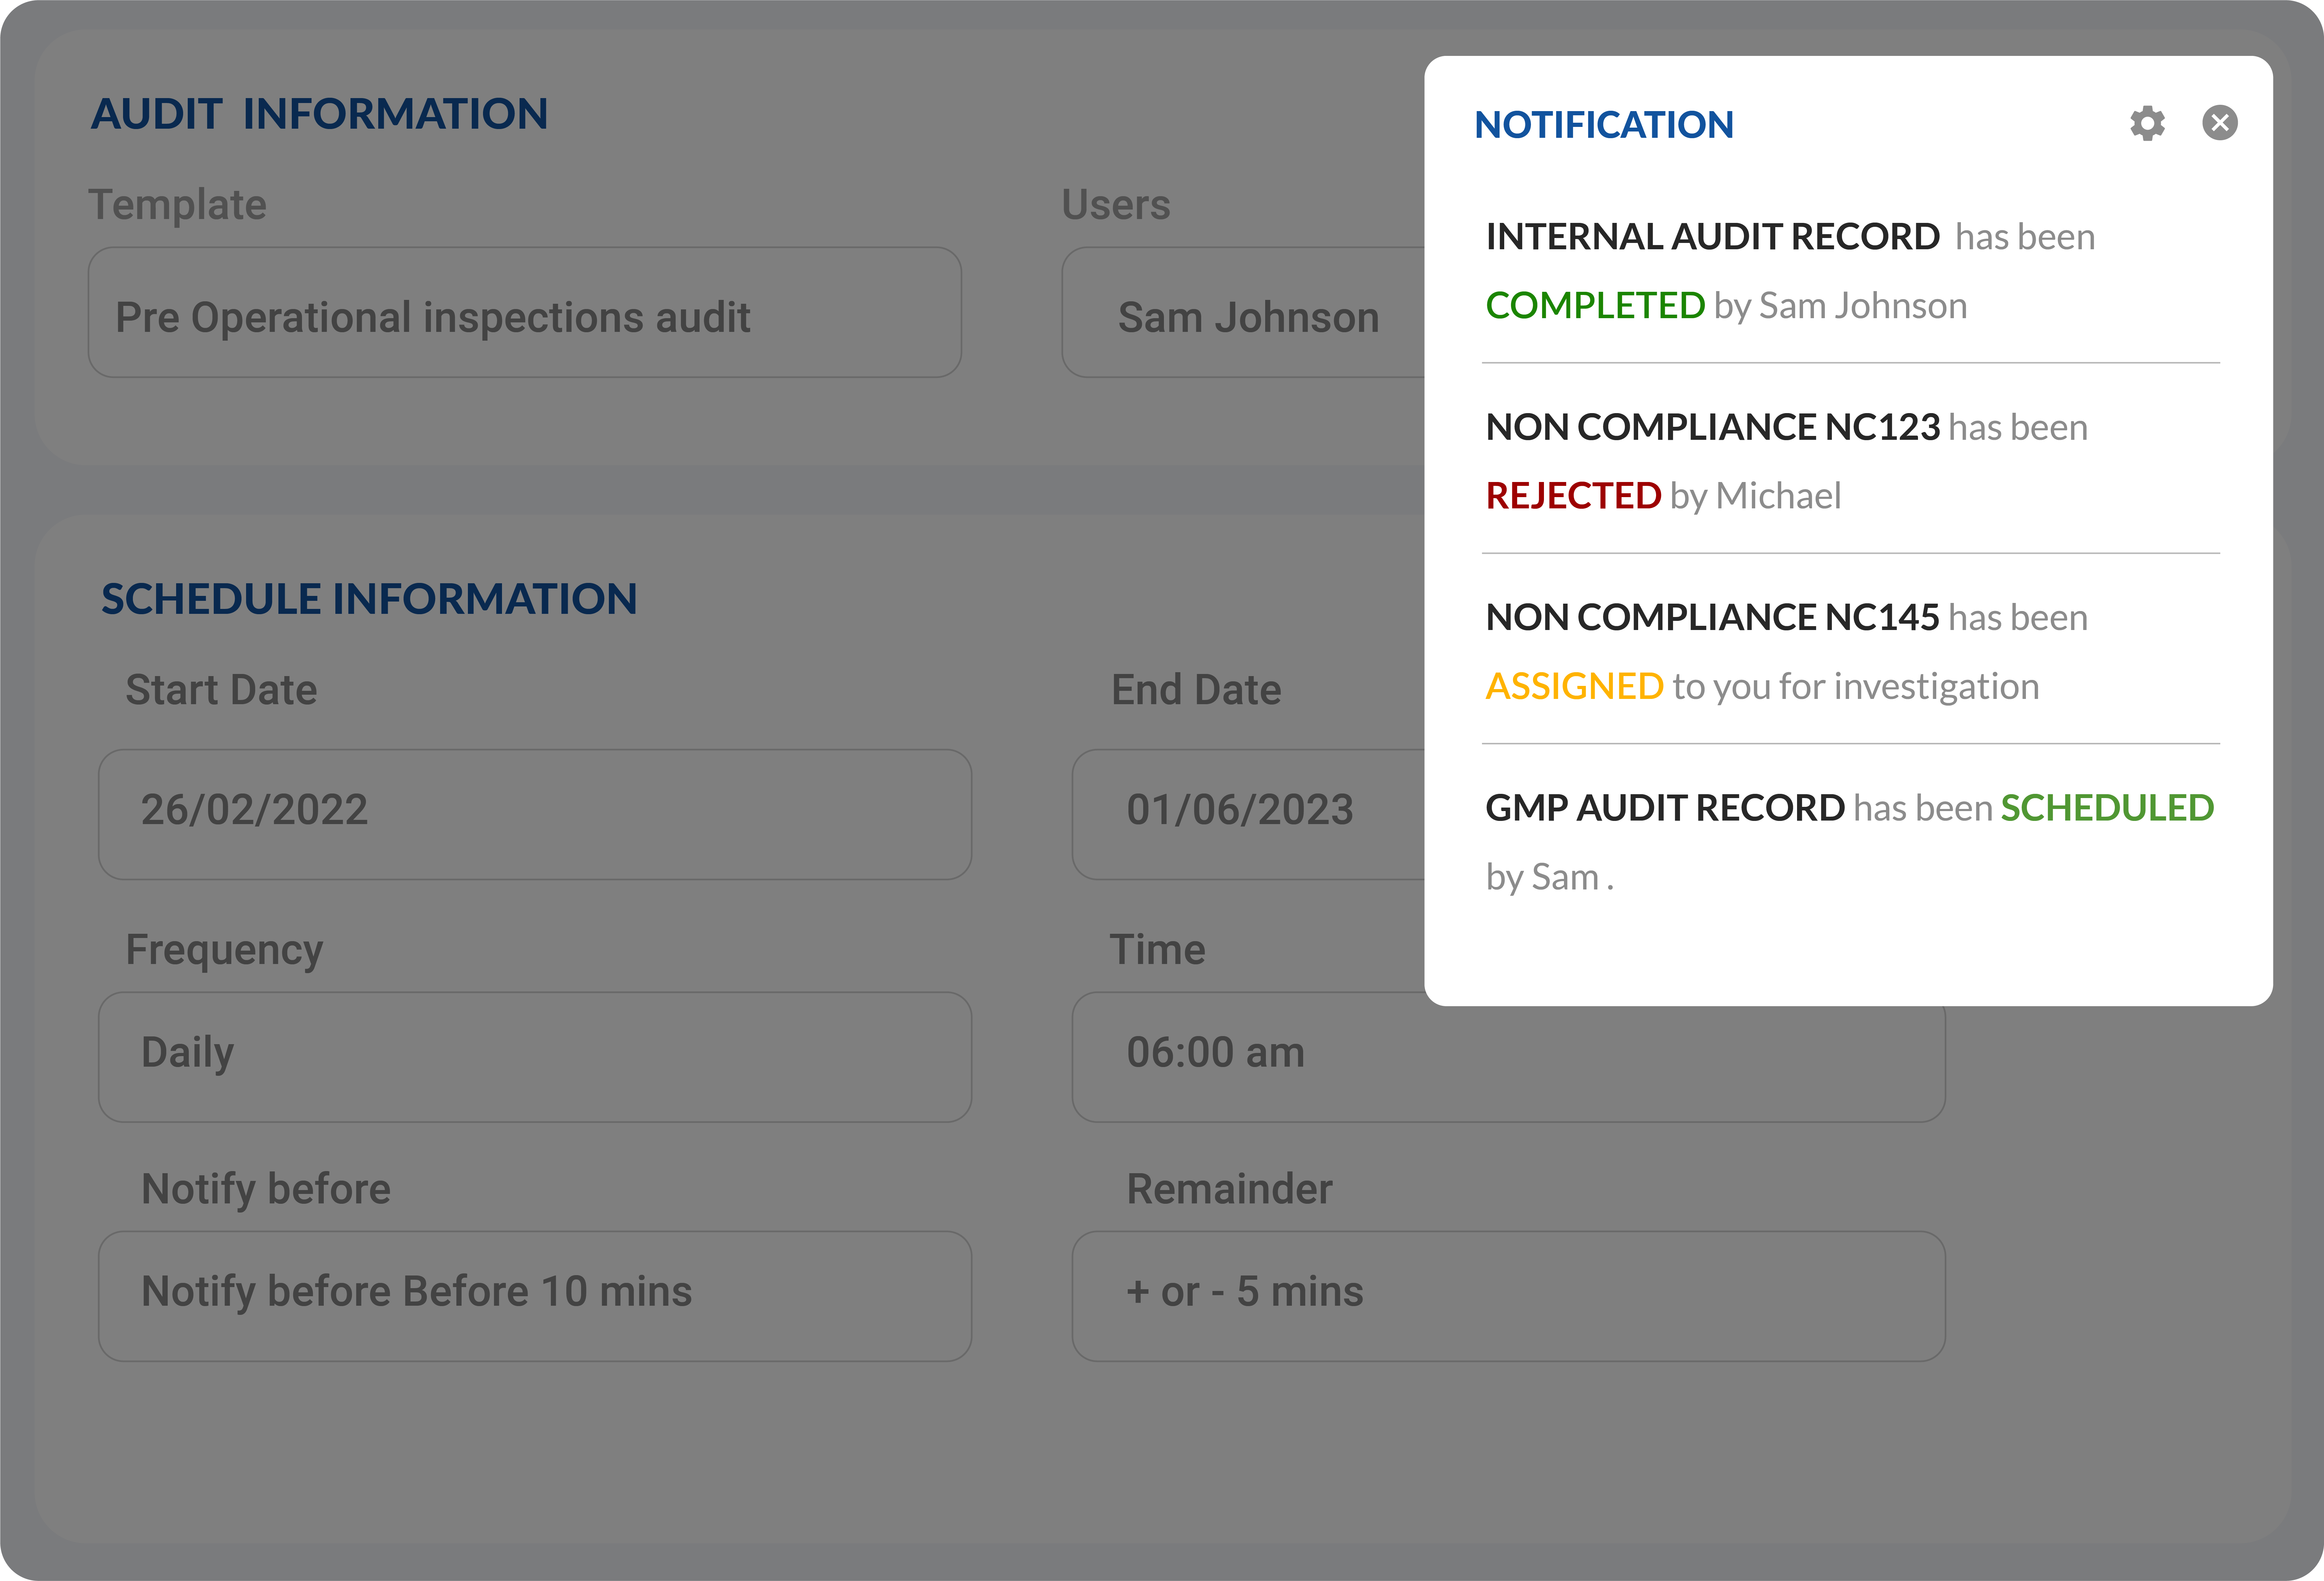 Stay updated on the current and pending actions with the notifications capability. The configurable notification capability lets the user decide when and how a user needs to be notified for which actions by email, sms, or through the in-app notifications.